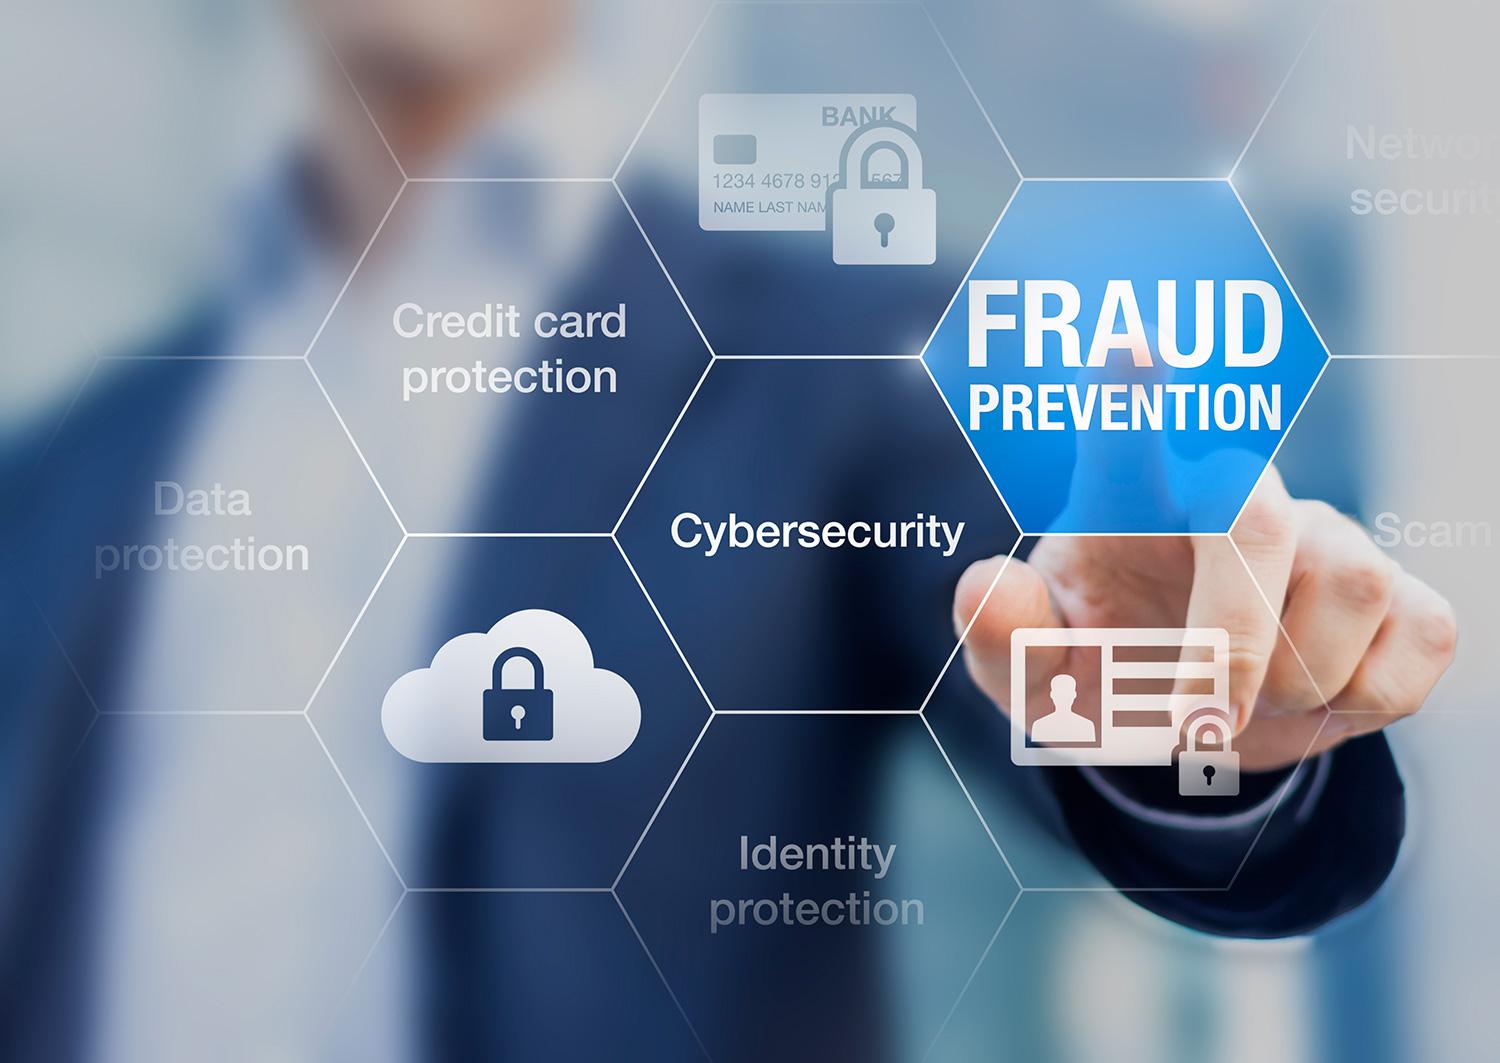 Fraud prevention button, concept about cybersecurity and credit card protection